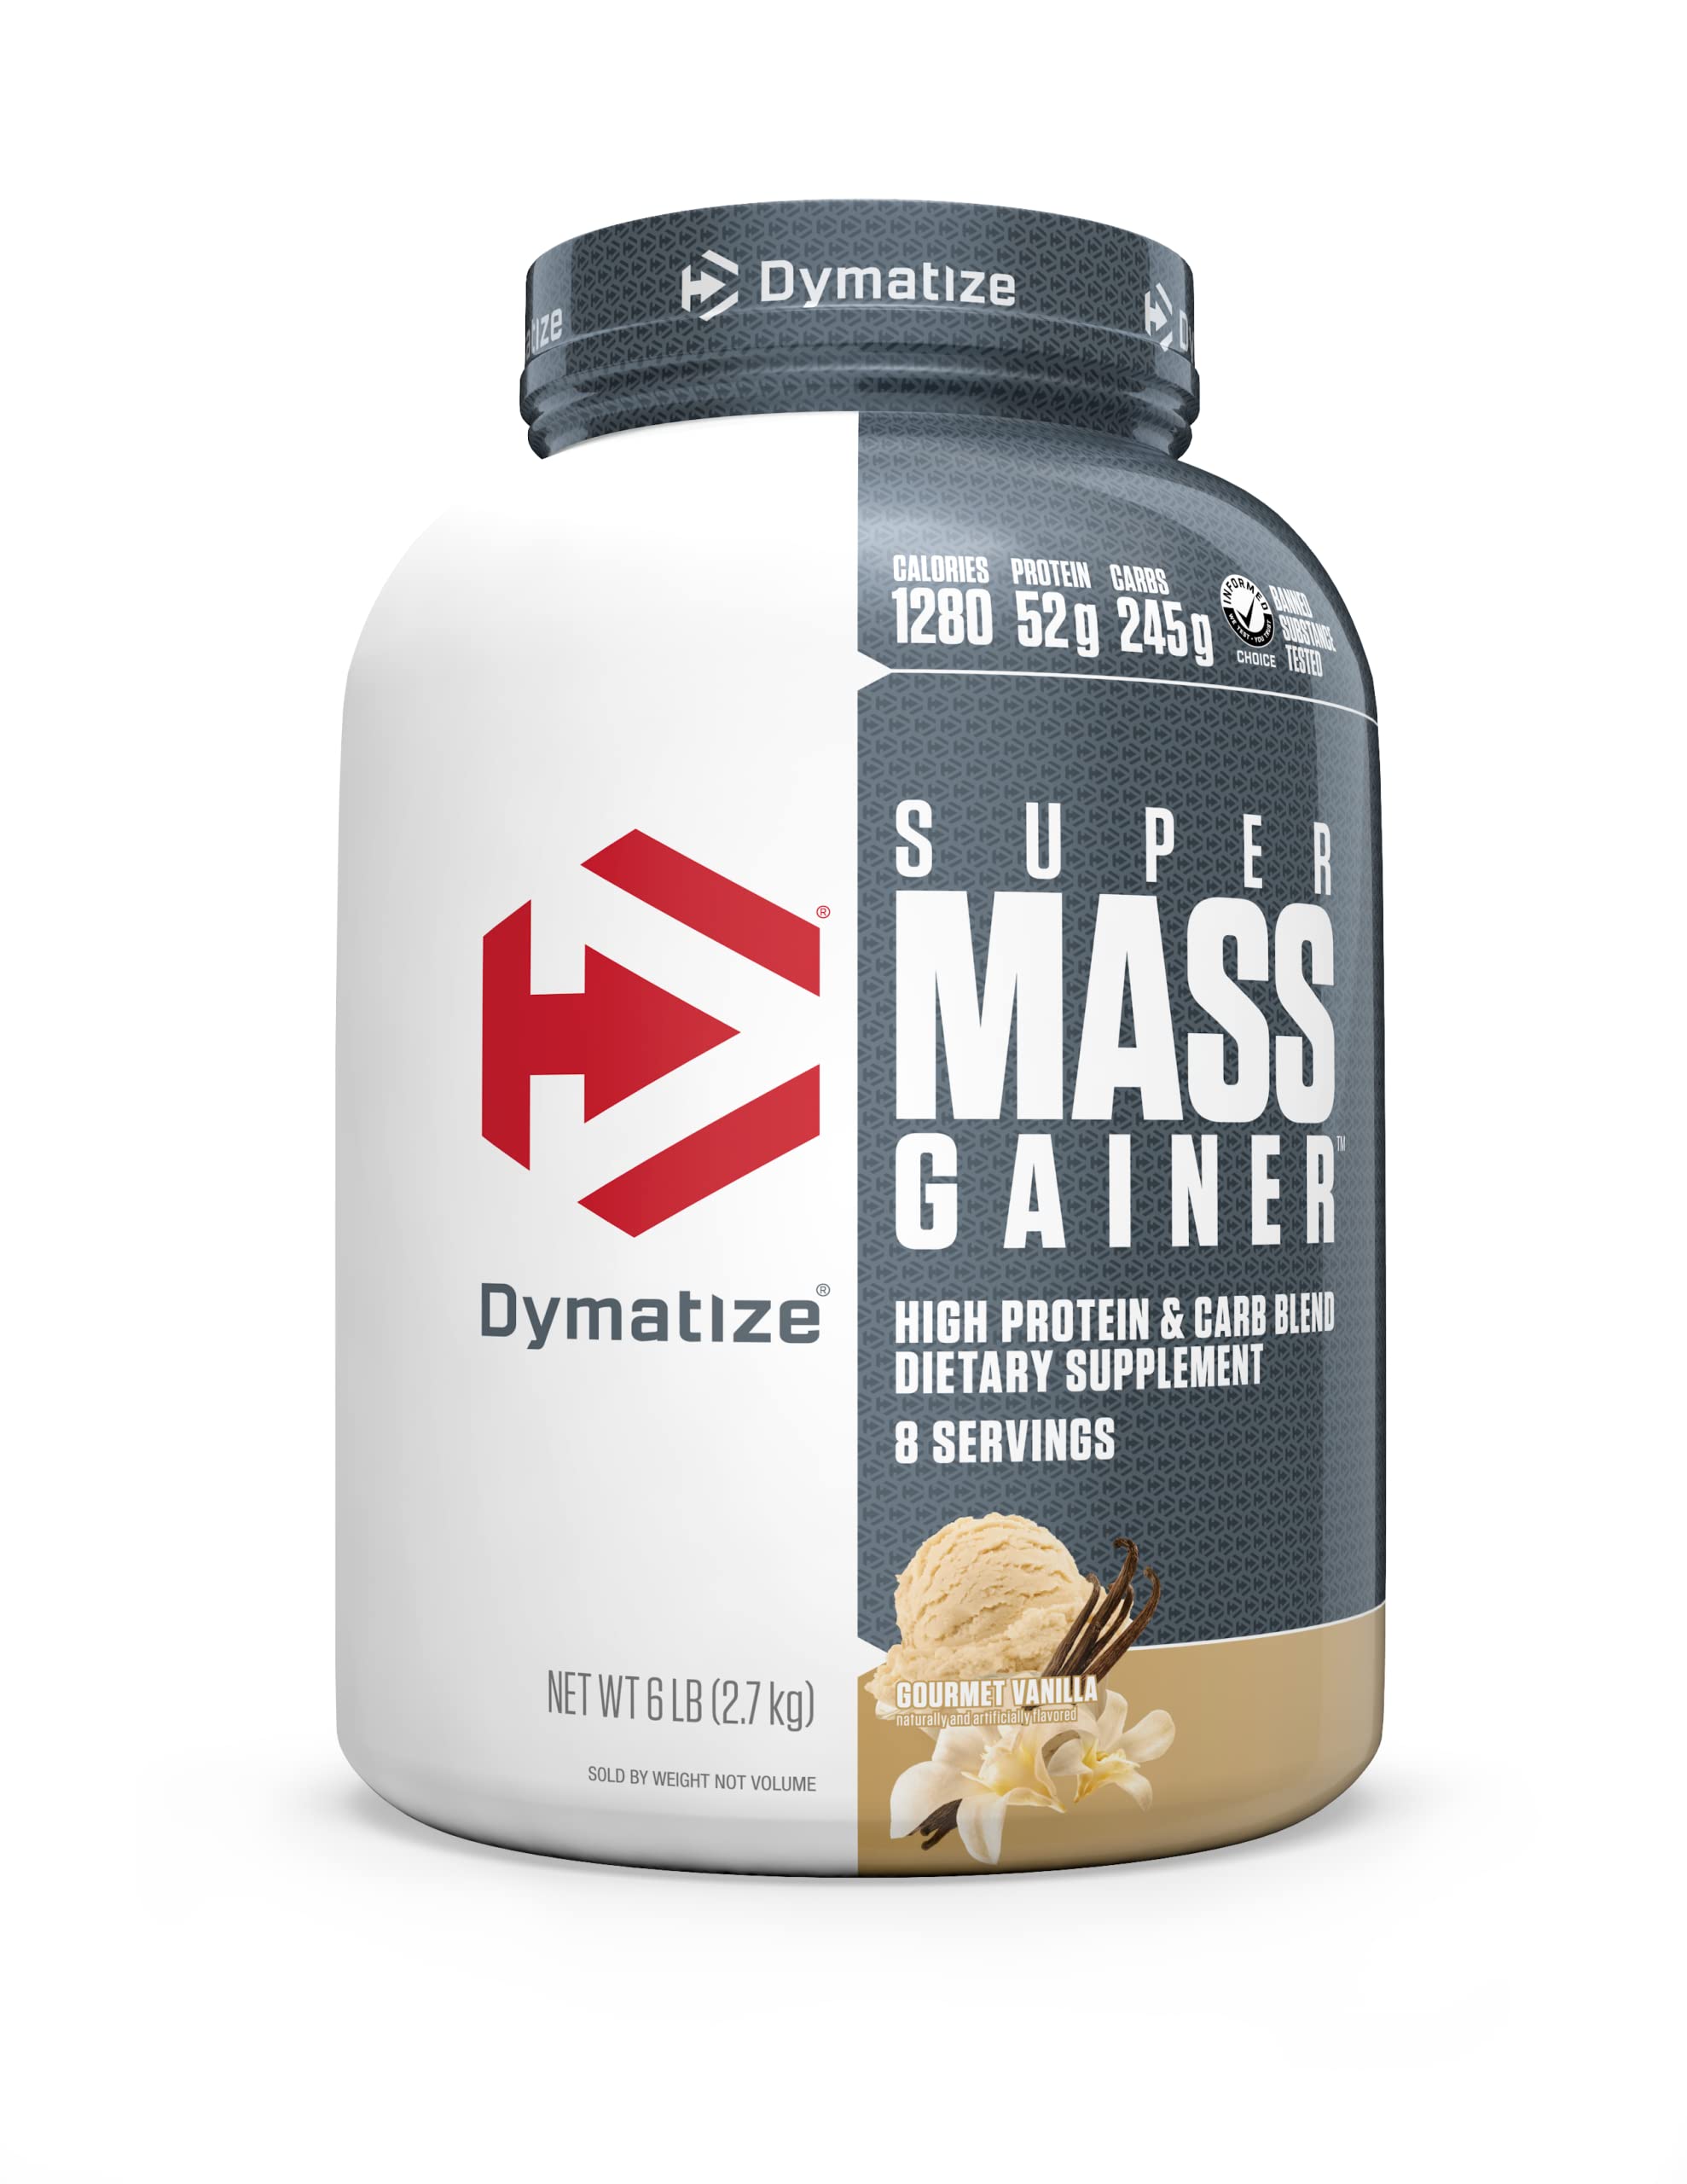 Book Cover Dymatize Super Mass Gainer Protein Powder, 1280 Calories & 52g Protein, Gain Strength & Size Quickly, 10.7g BCAAs, Mixes Easily, Tastes Delicious, Gourmet Vanilla, 6 Pound (Pack of 1) Gourmet Vanilla 8.0 Servings (Pack of 1)